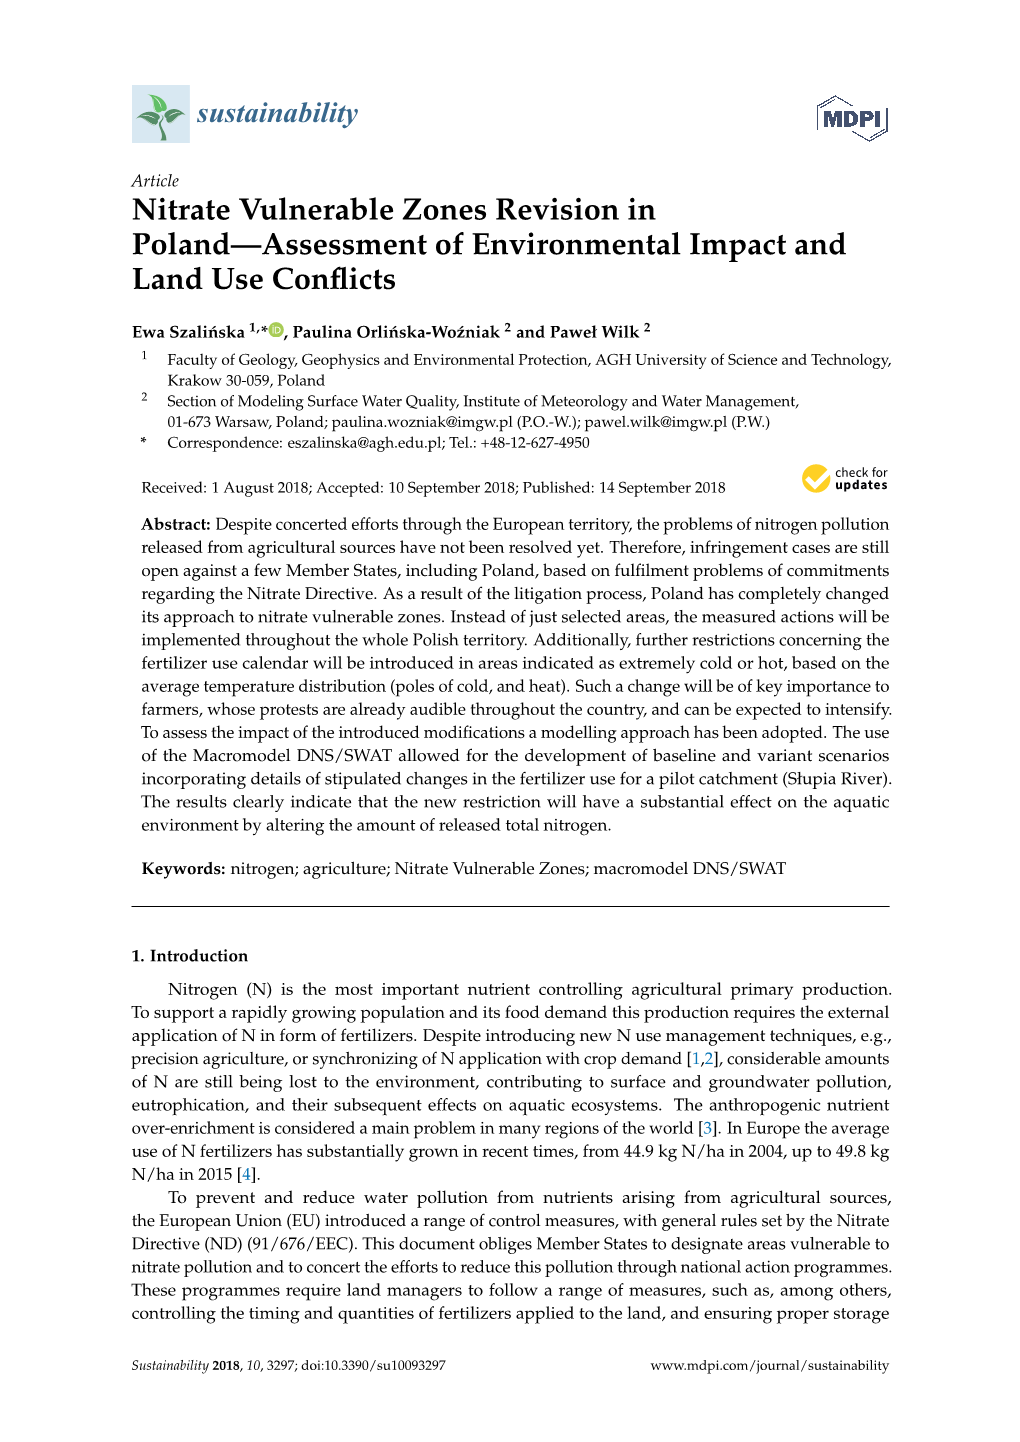 Nitrate Vulnerable Zones Revision in Poland—Assessment of Environmental Impact and Land Use Conﬂicts